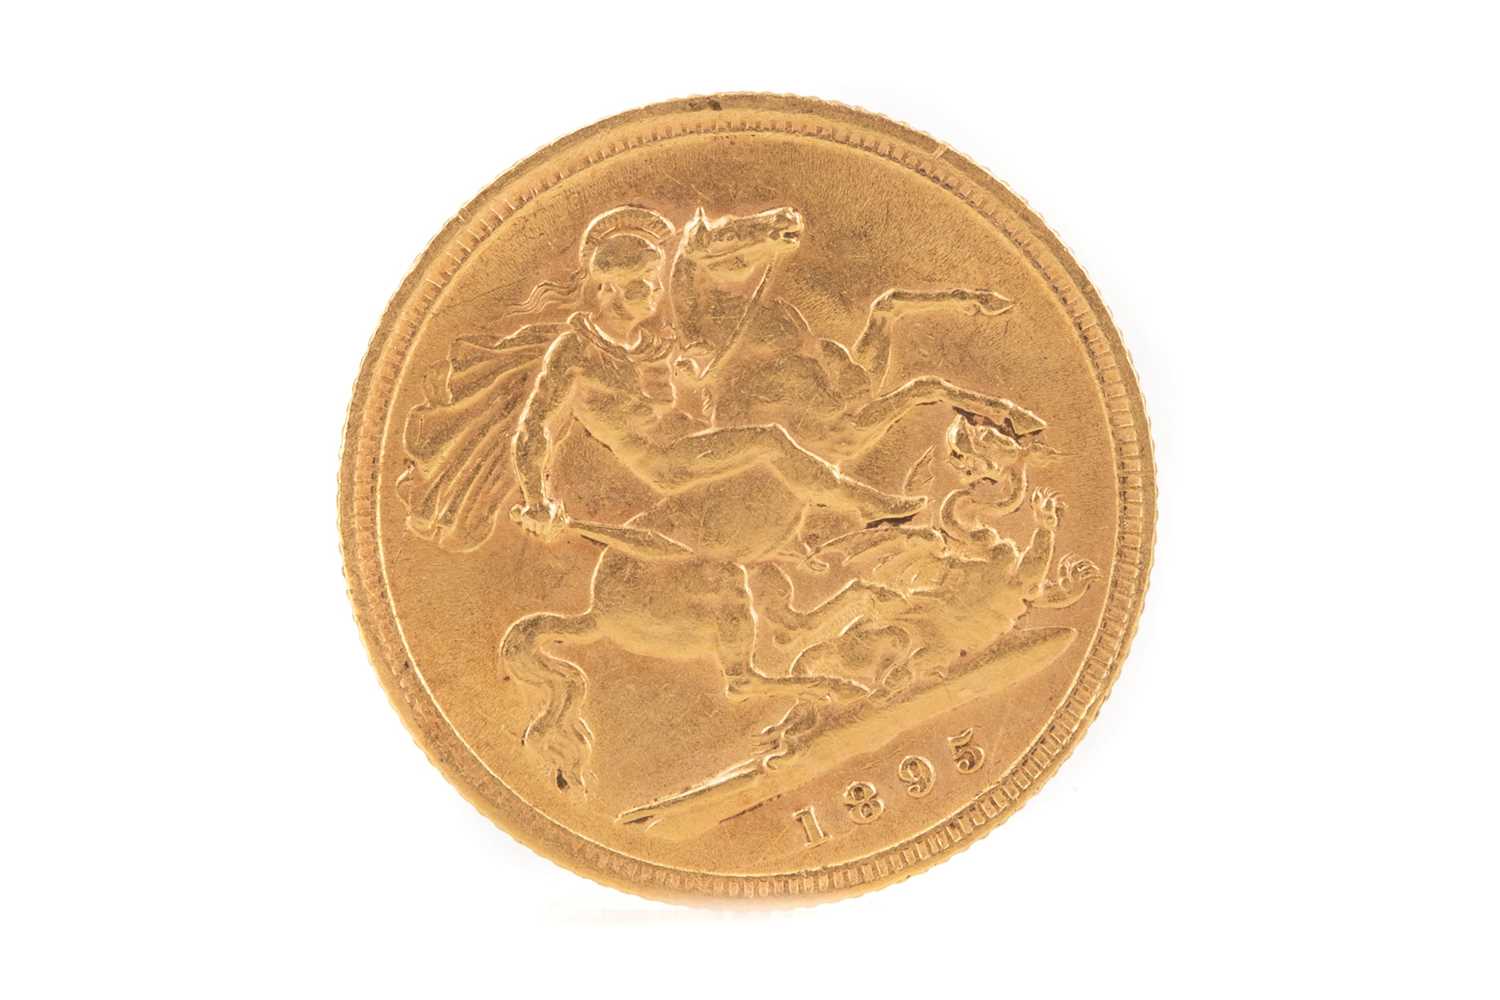 A VICTORIA GOLD HALF SOVEREIGN DATED 1895